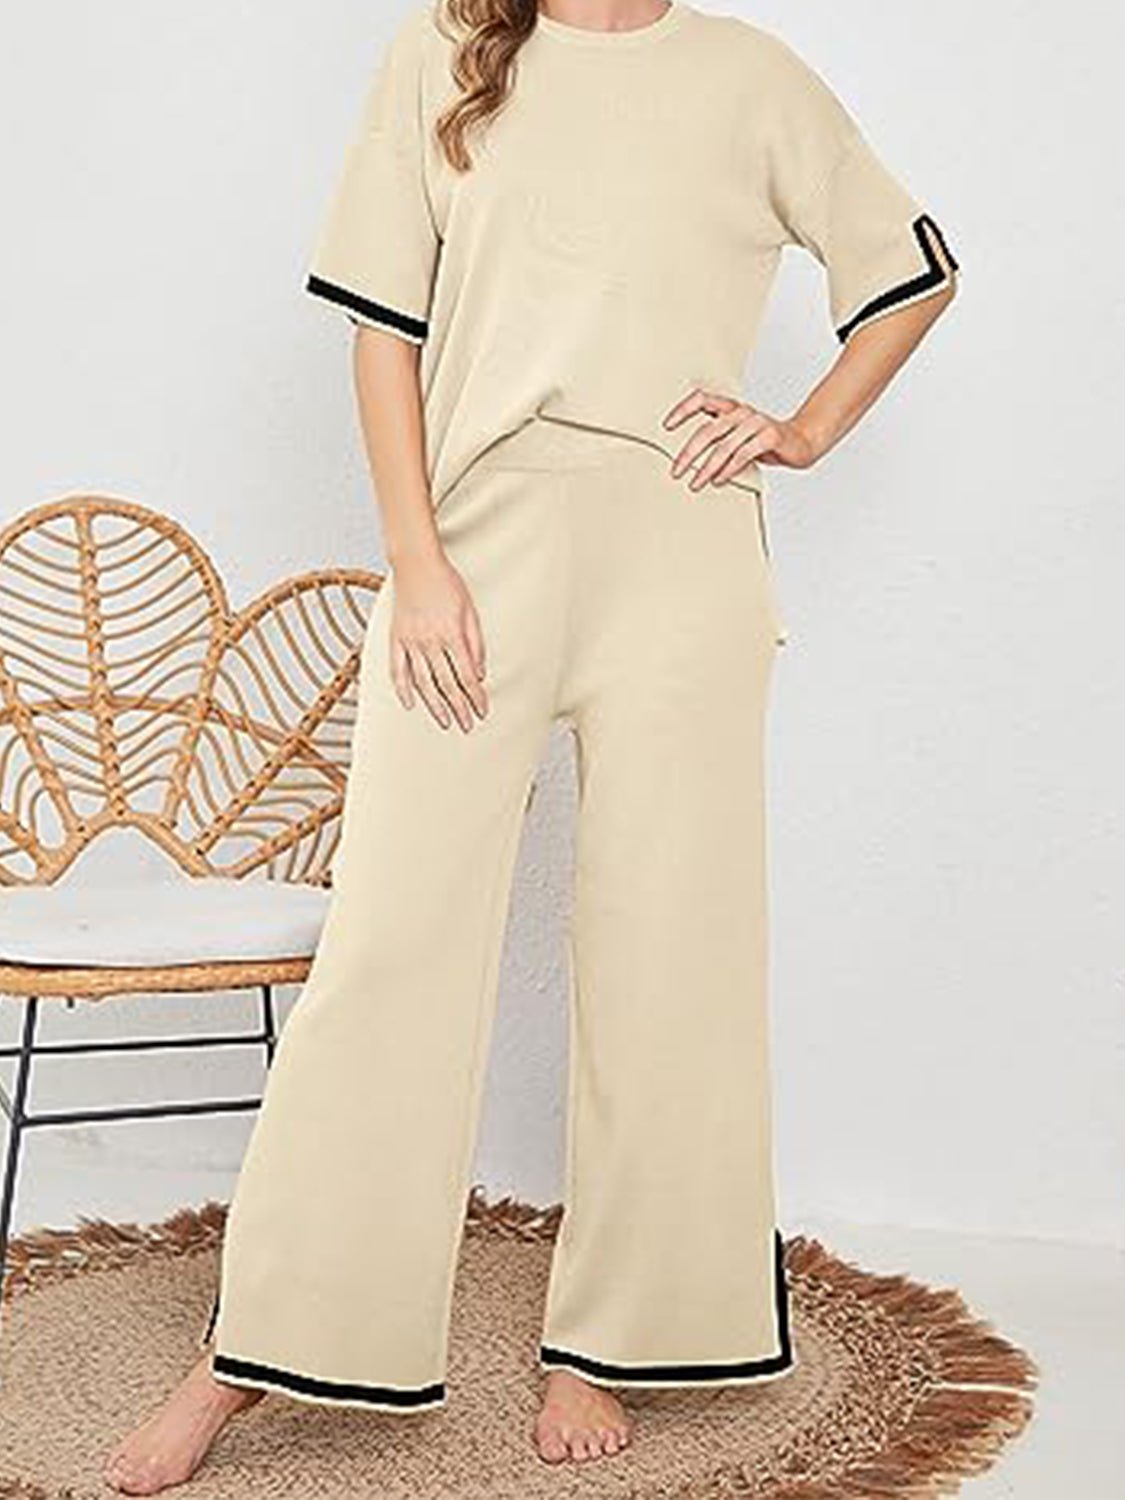 Contrast High-Low Sweater and Knit Pants Set - Fashion Girl Online Store